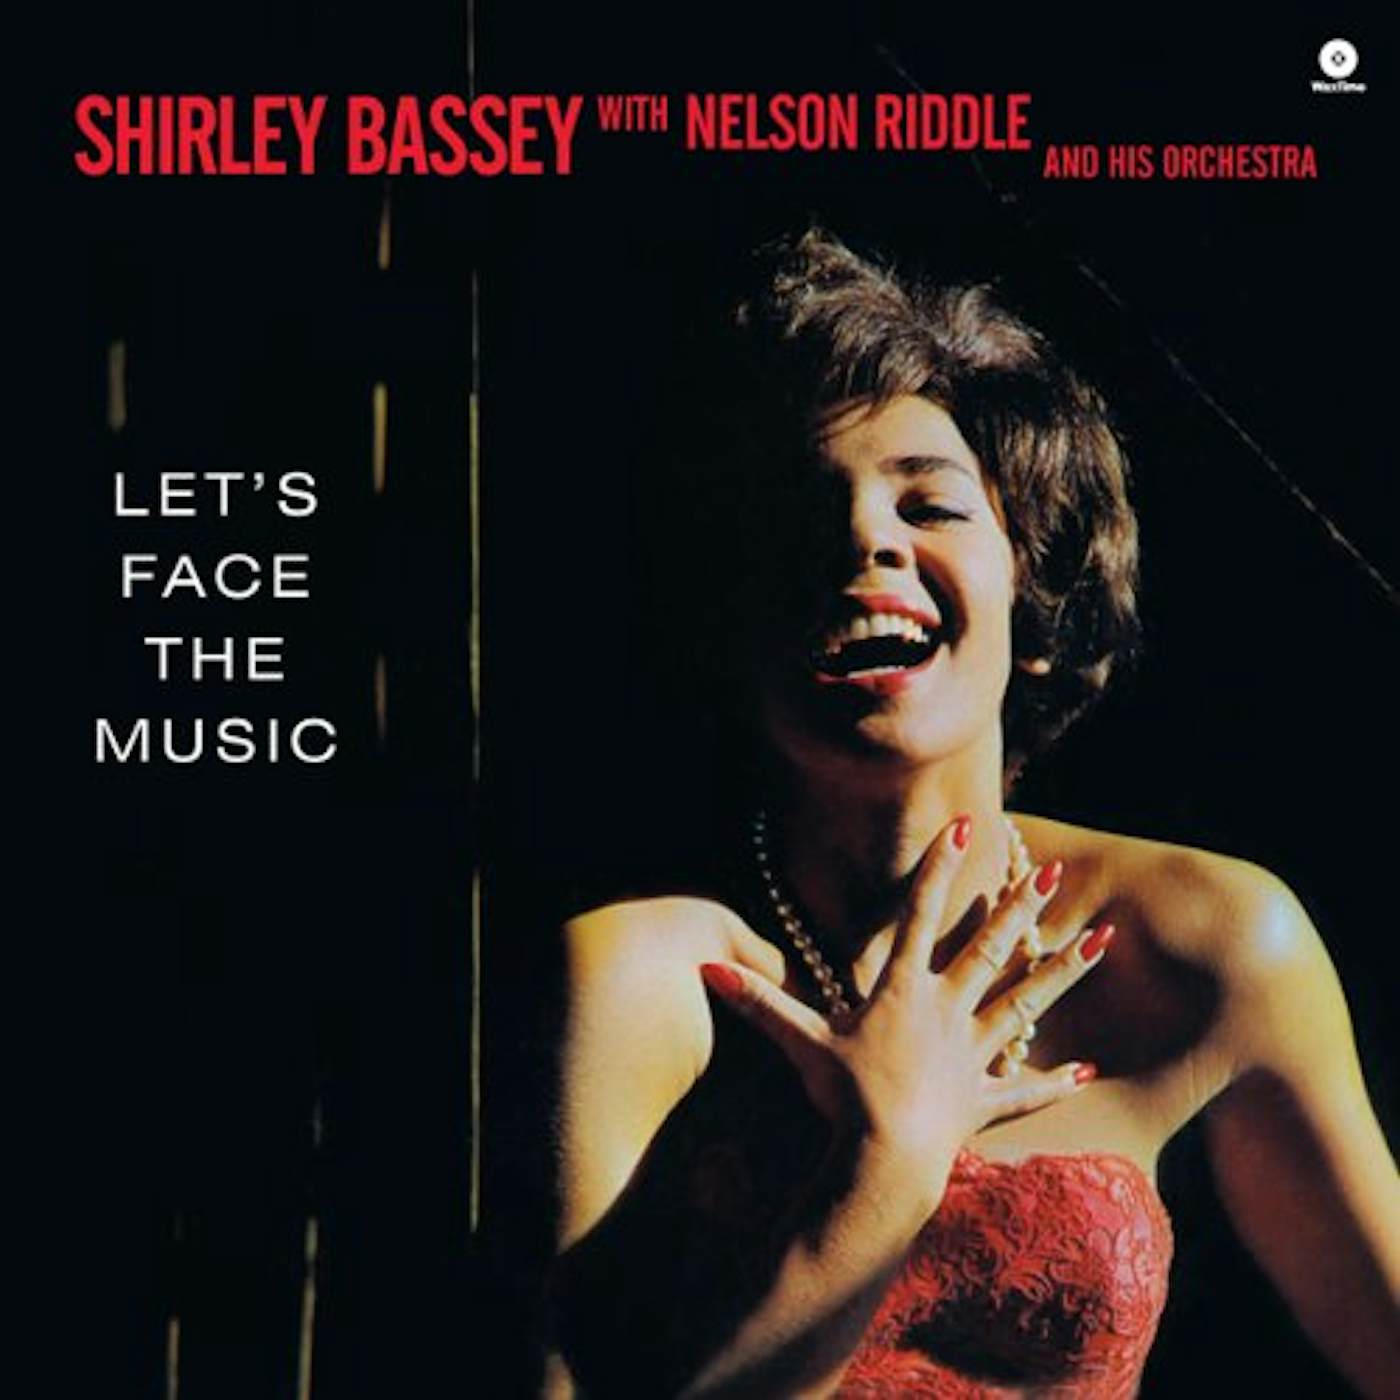 Shirley Bassey LET'S FACE THE MUSIC-THE COMPLETE EDITION Vinyl Record - Spain Release